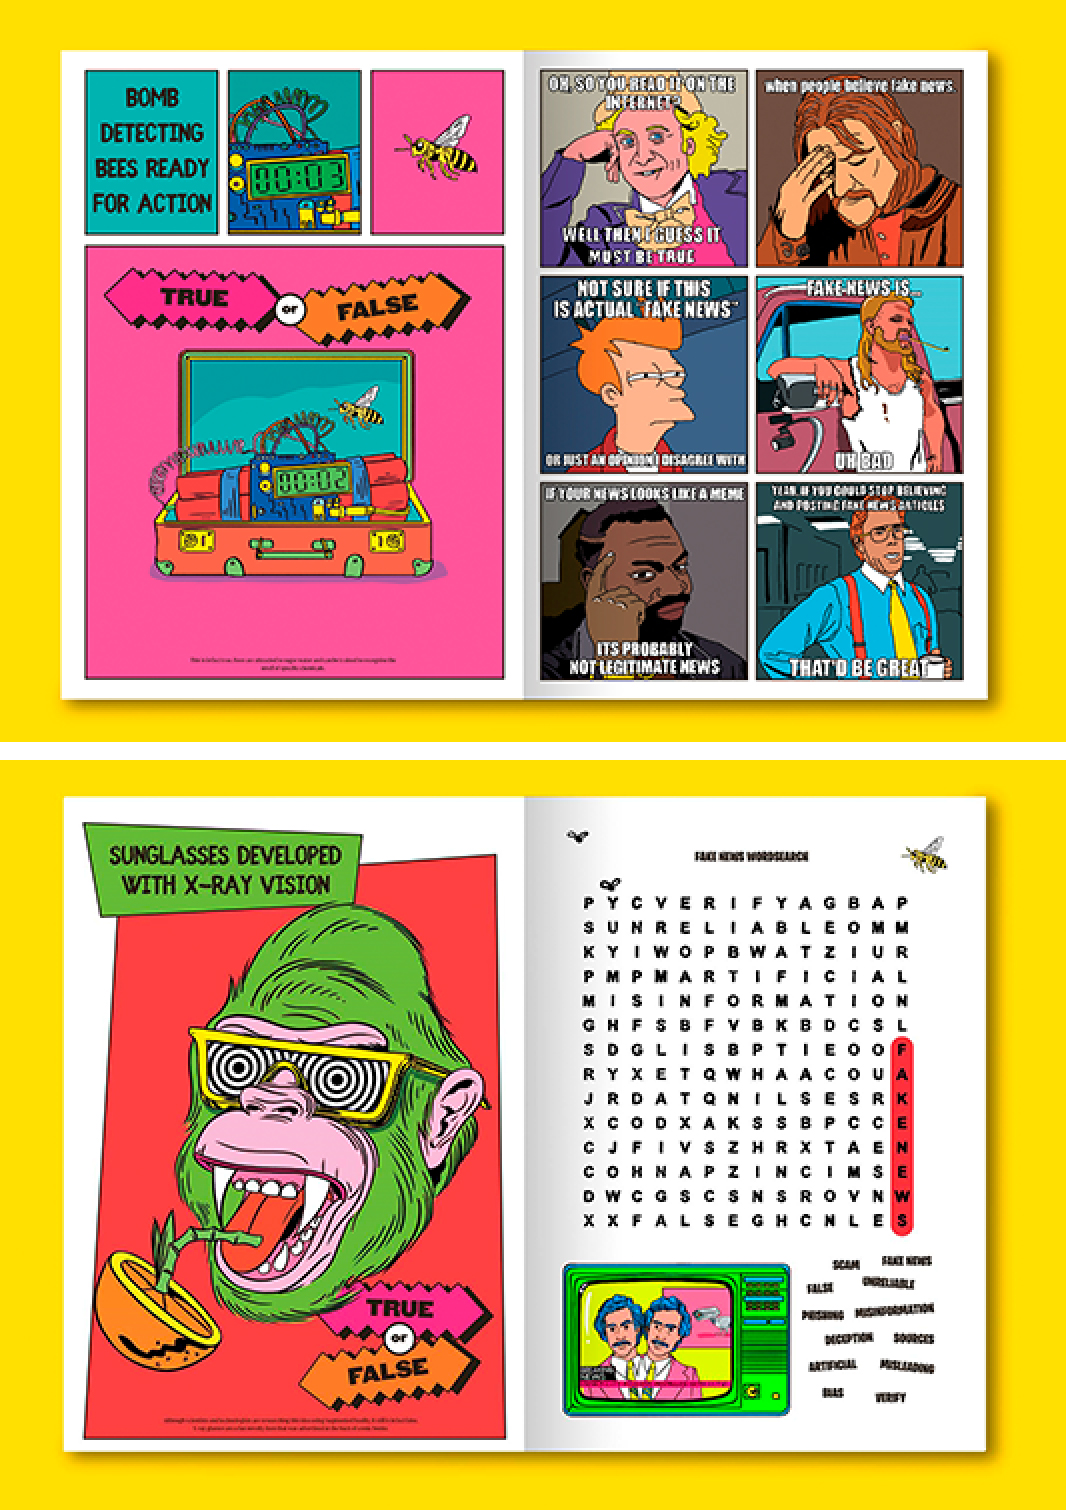 Artworks depicting fake news as part of educating the public and promoting cyber wellness under the Better Internet Campaign